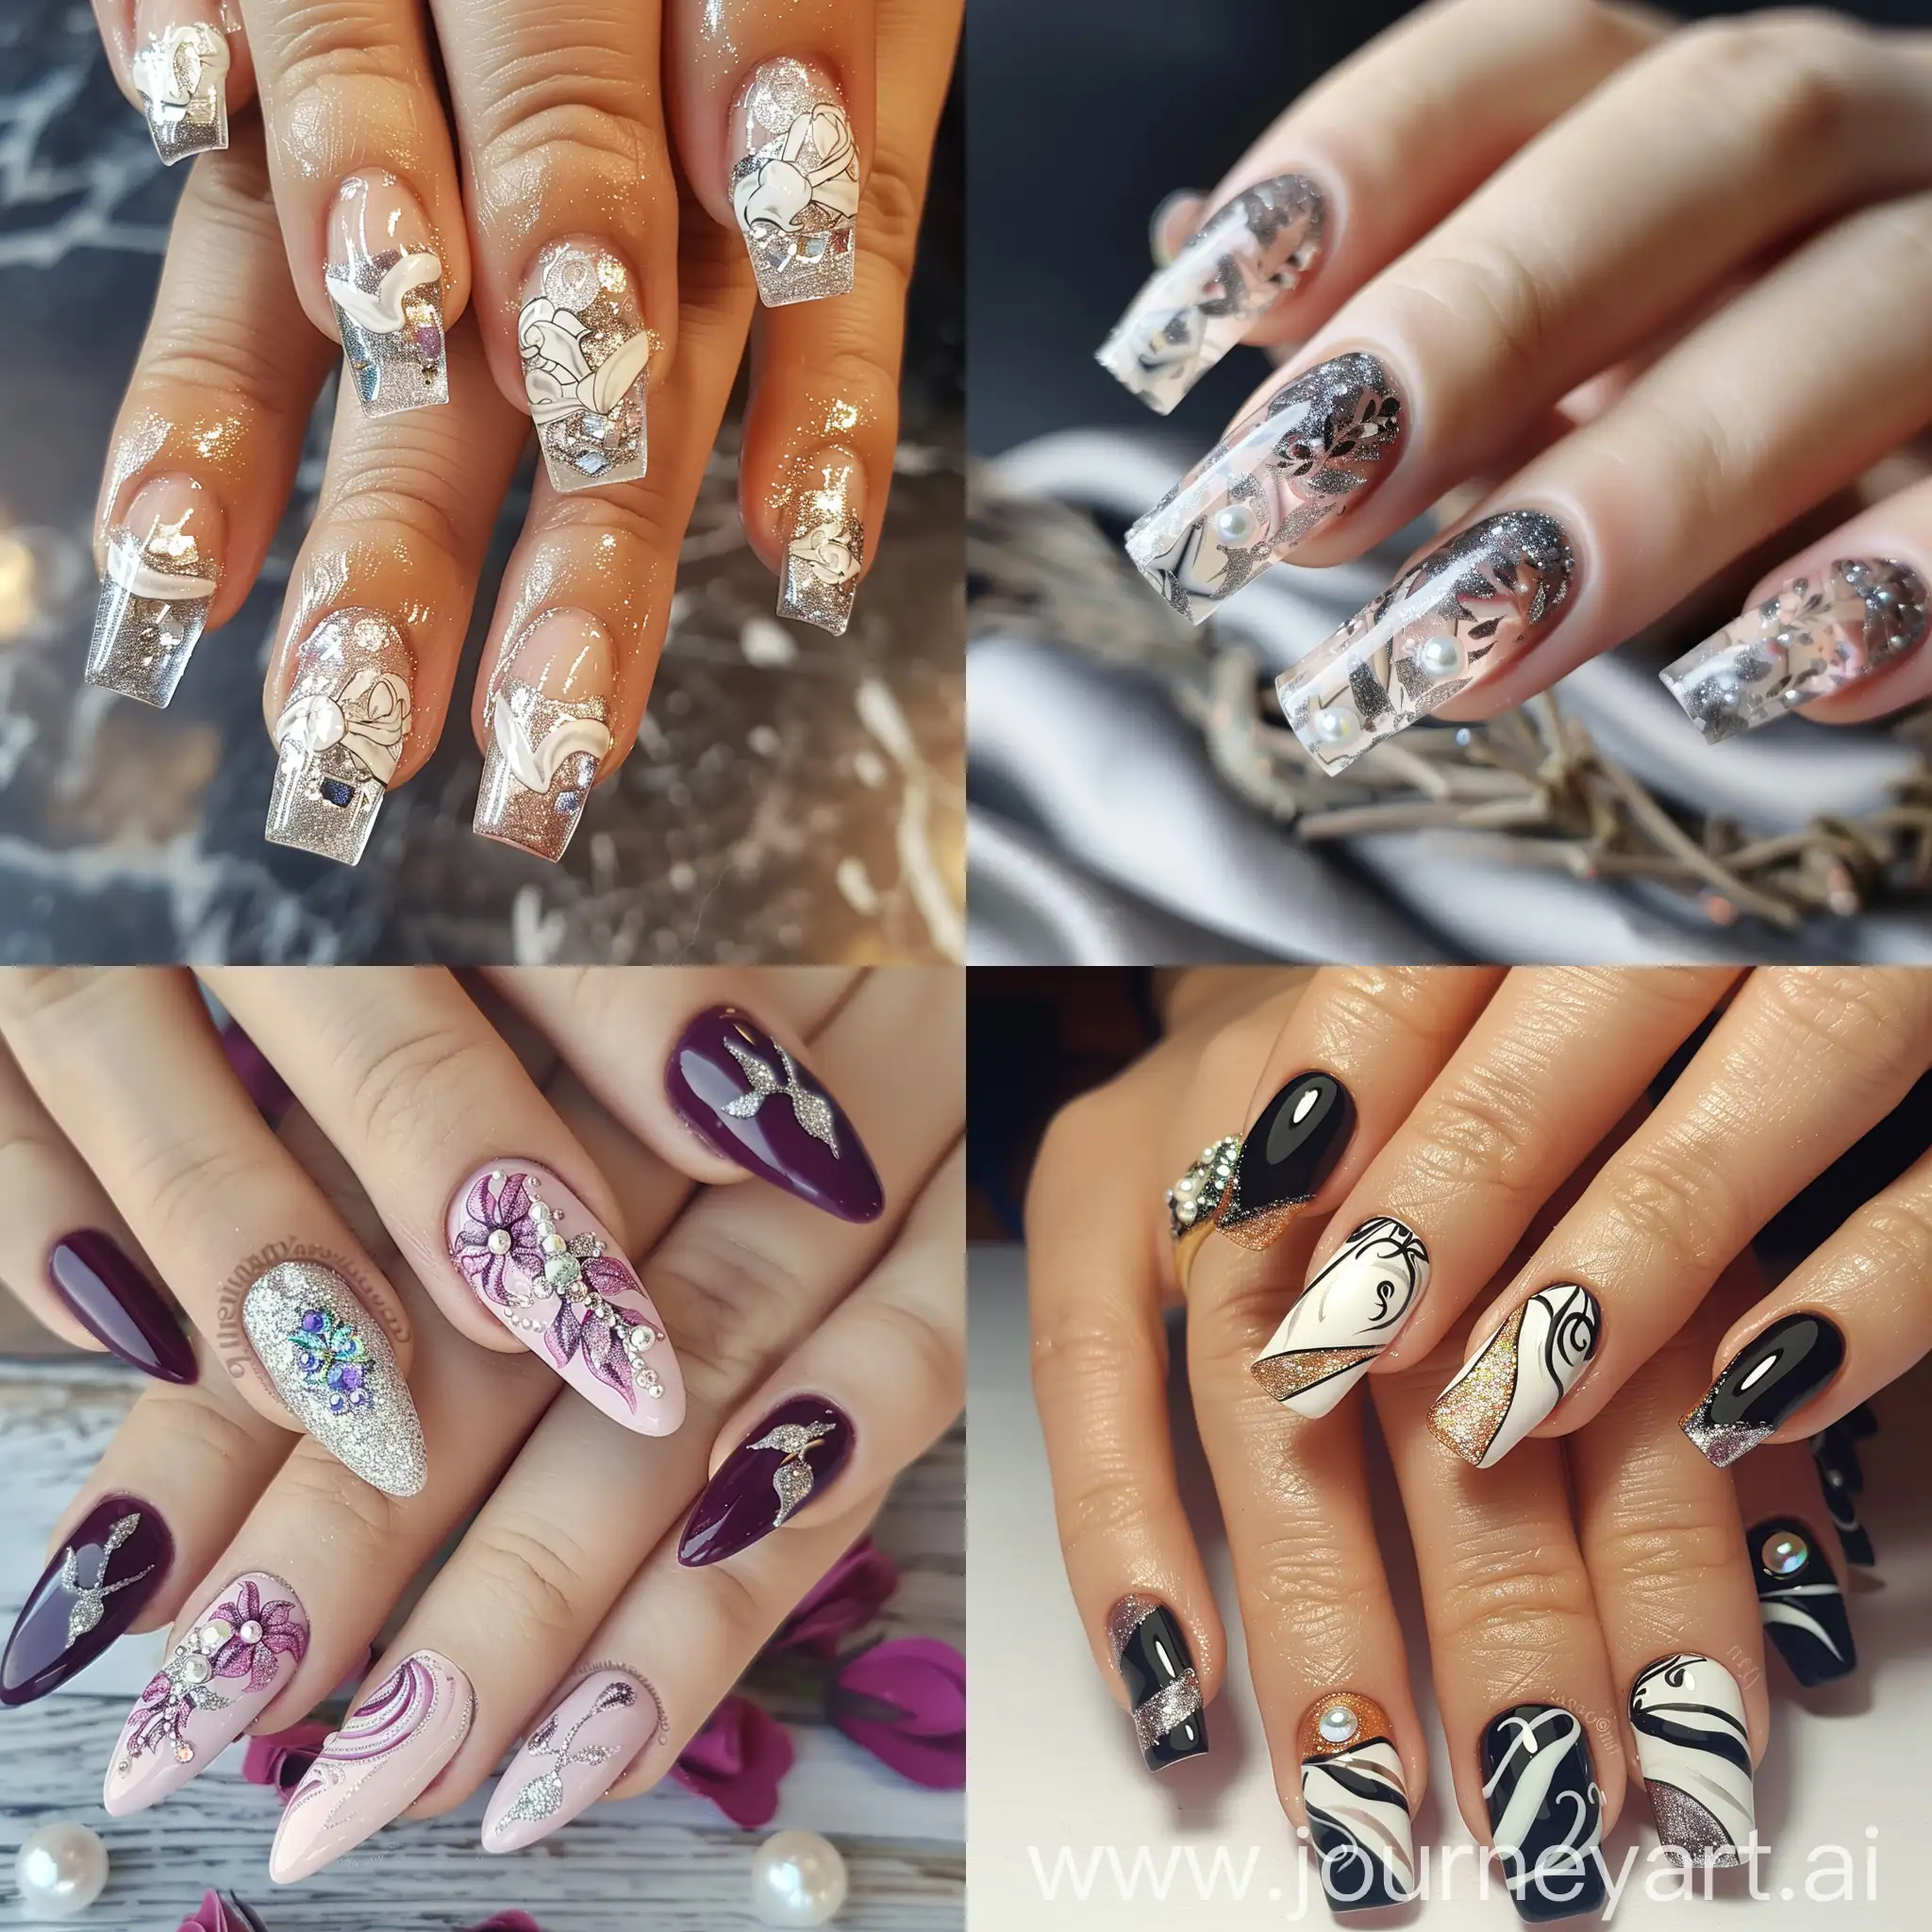 Trendy-HandPainted-Nail-Art-with-Unique-Texture-and-Detail